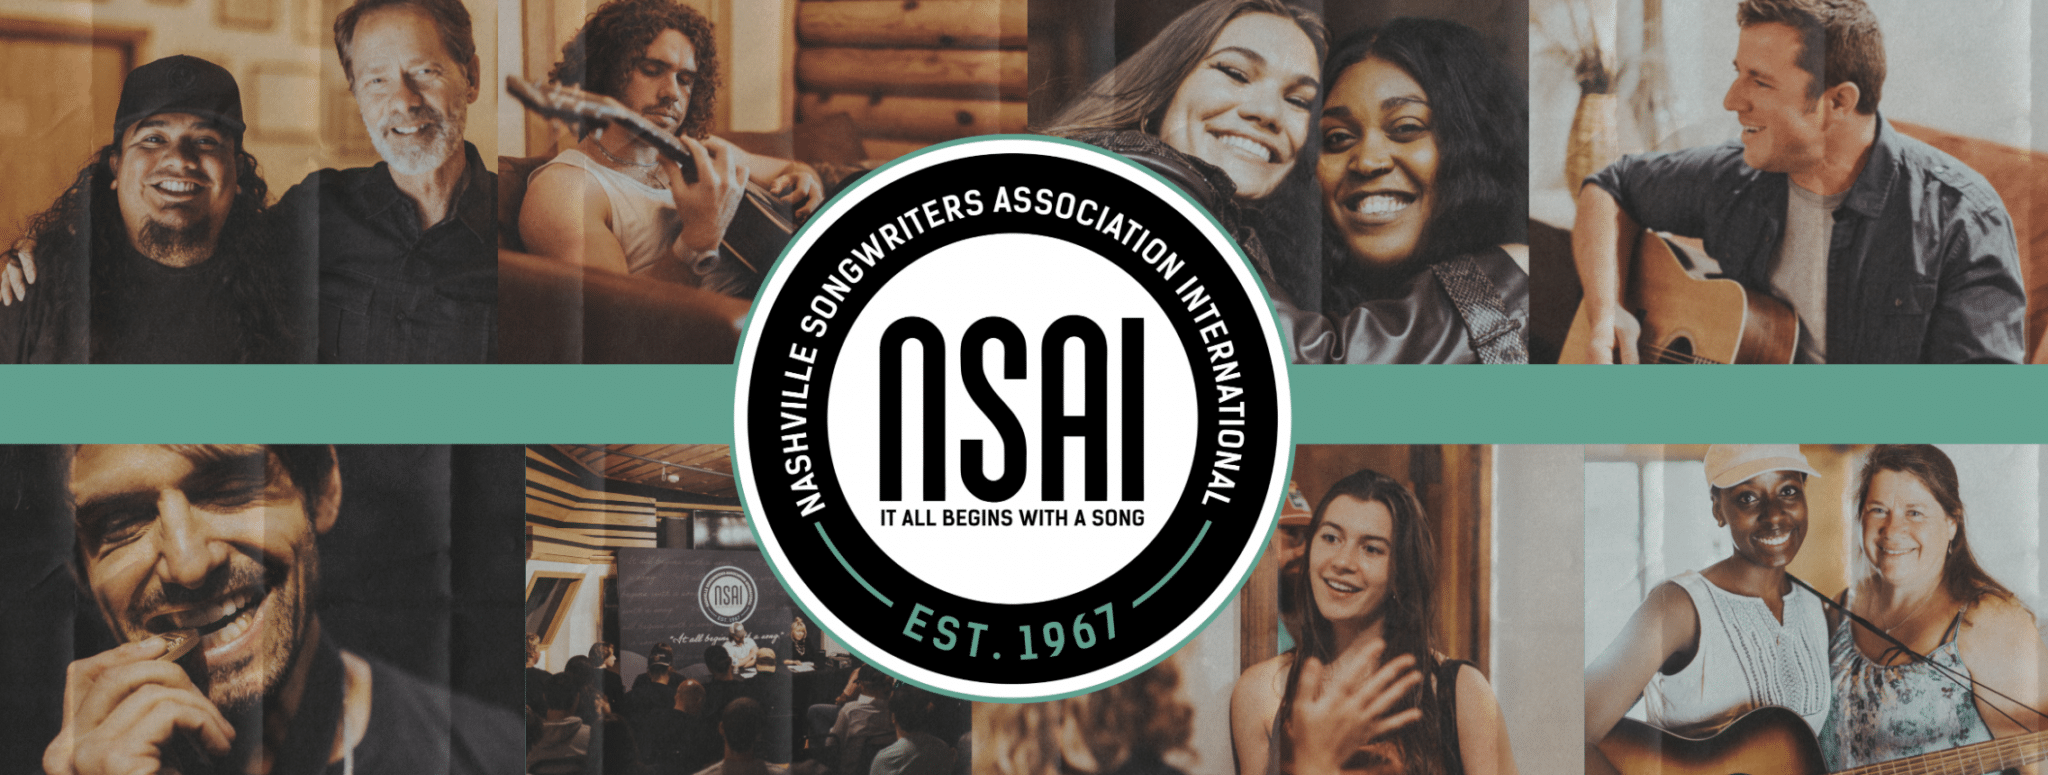 Nashville Songwriters Association International logo in the center of images of singer-songwriters.